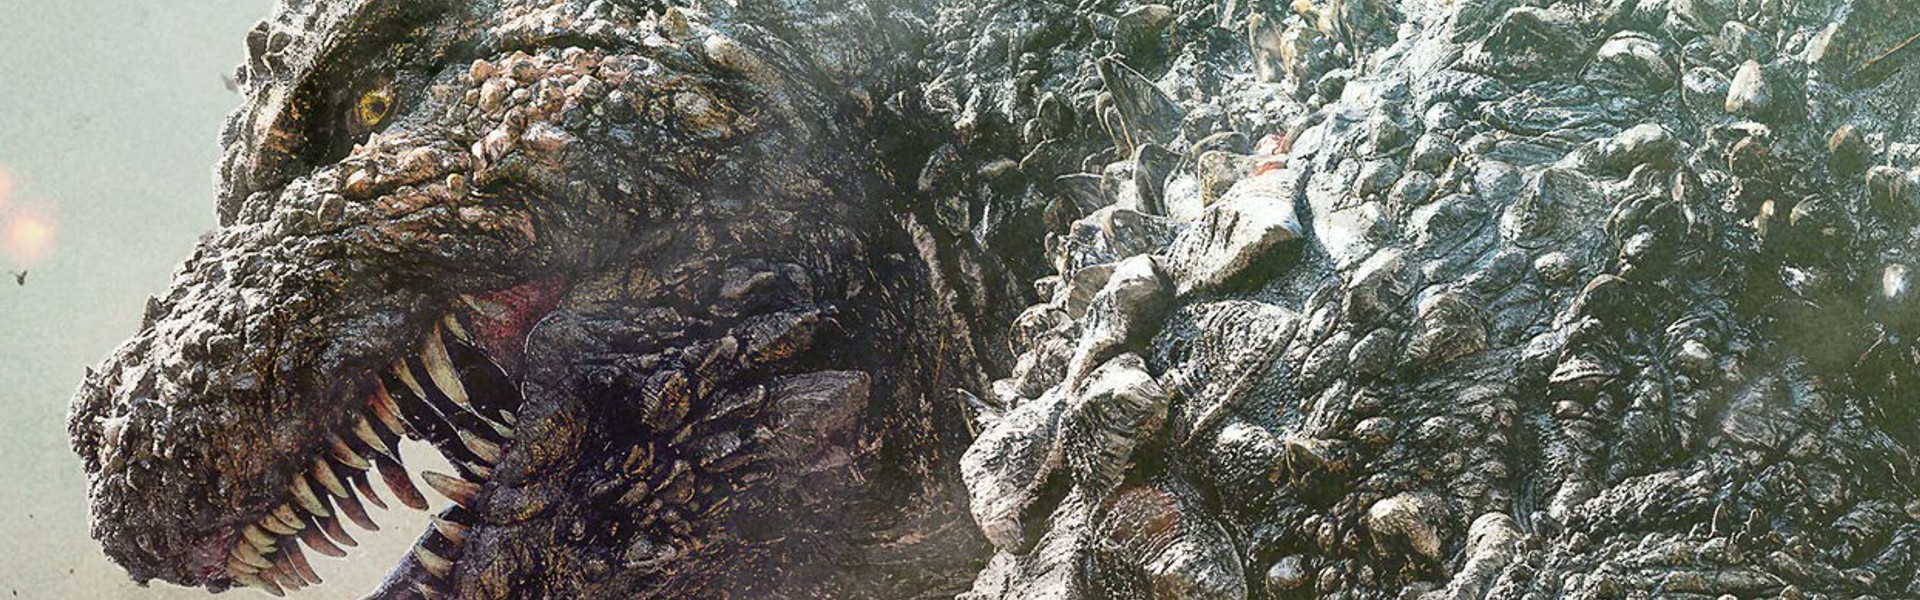 Teaser Godzilla Minus One: “Godzilla is back! It’s the first Japanese live-action film in 7 years.”